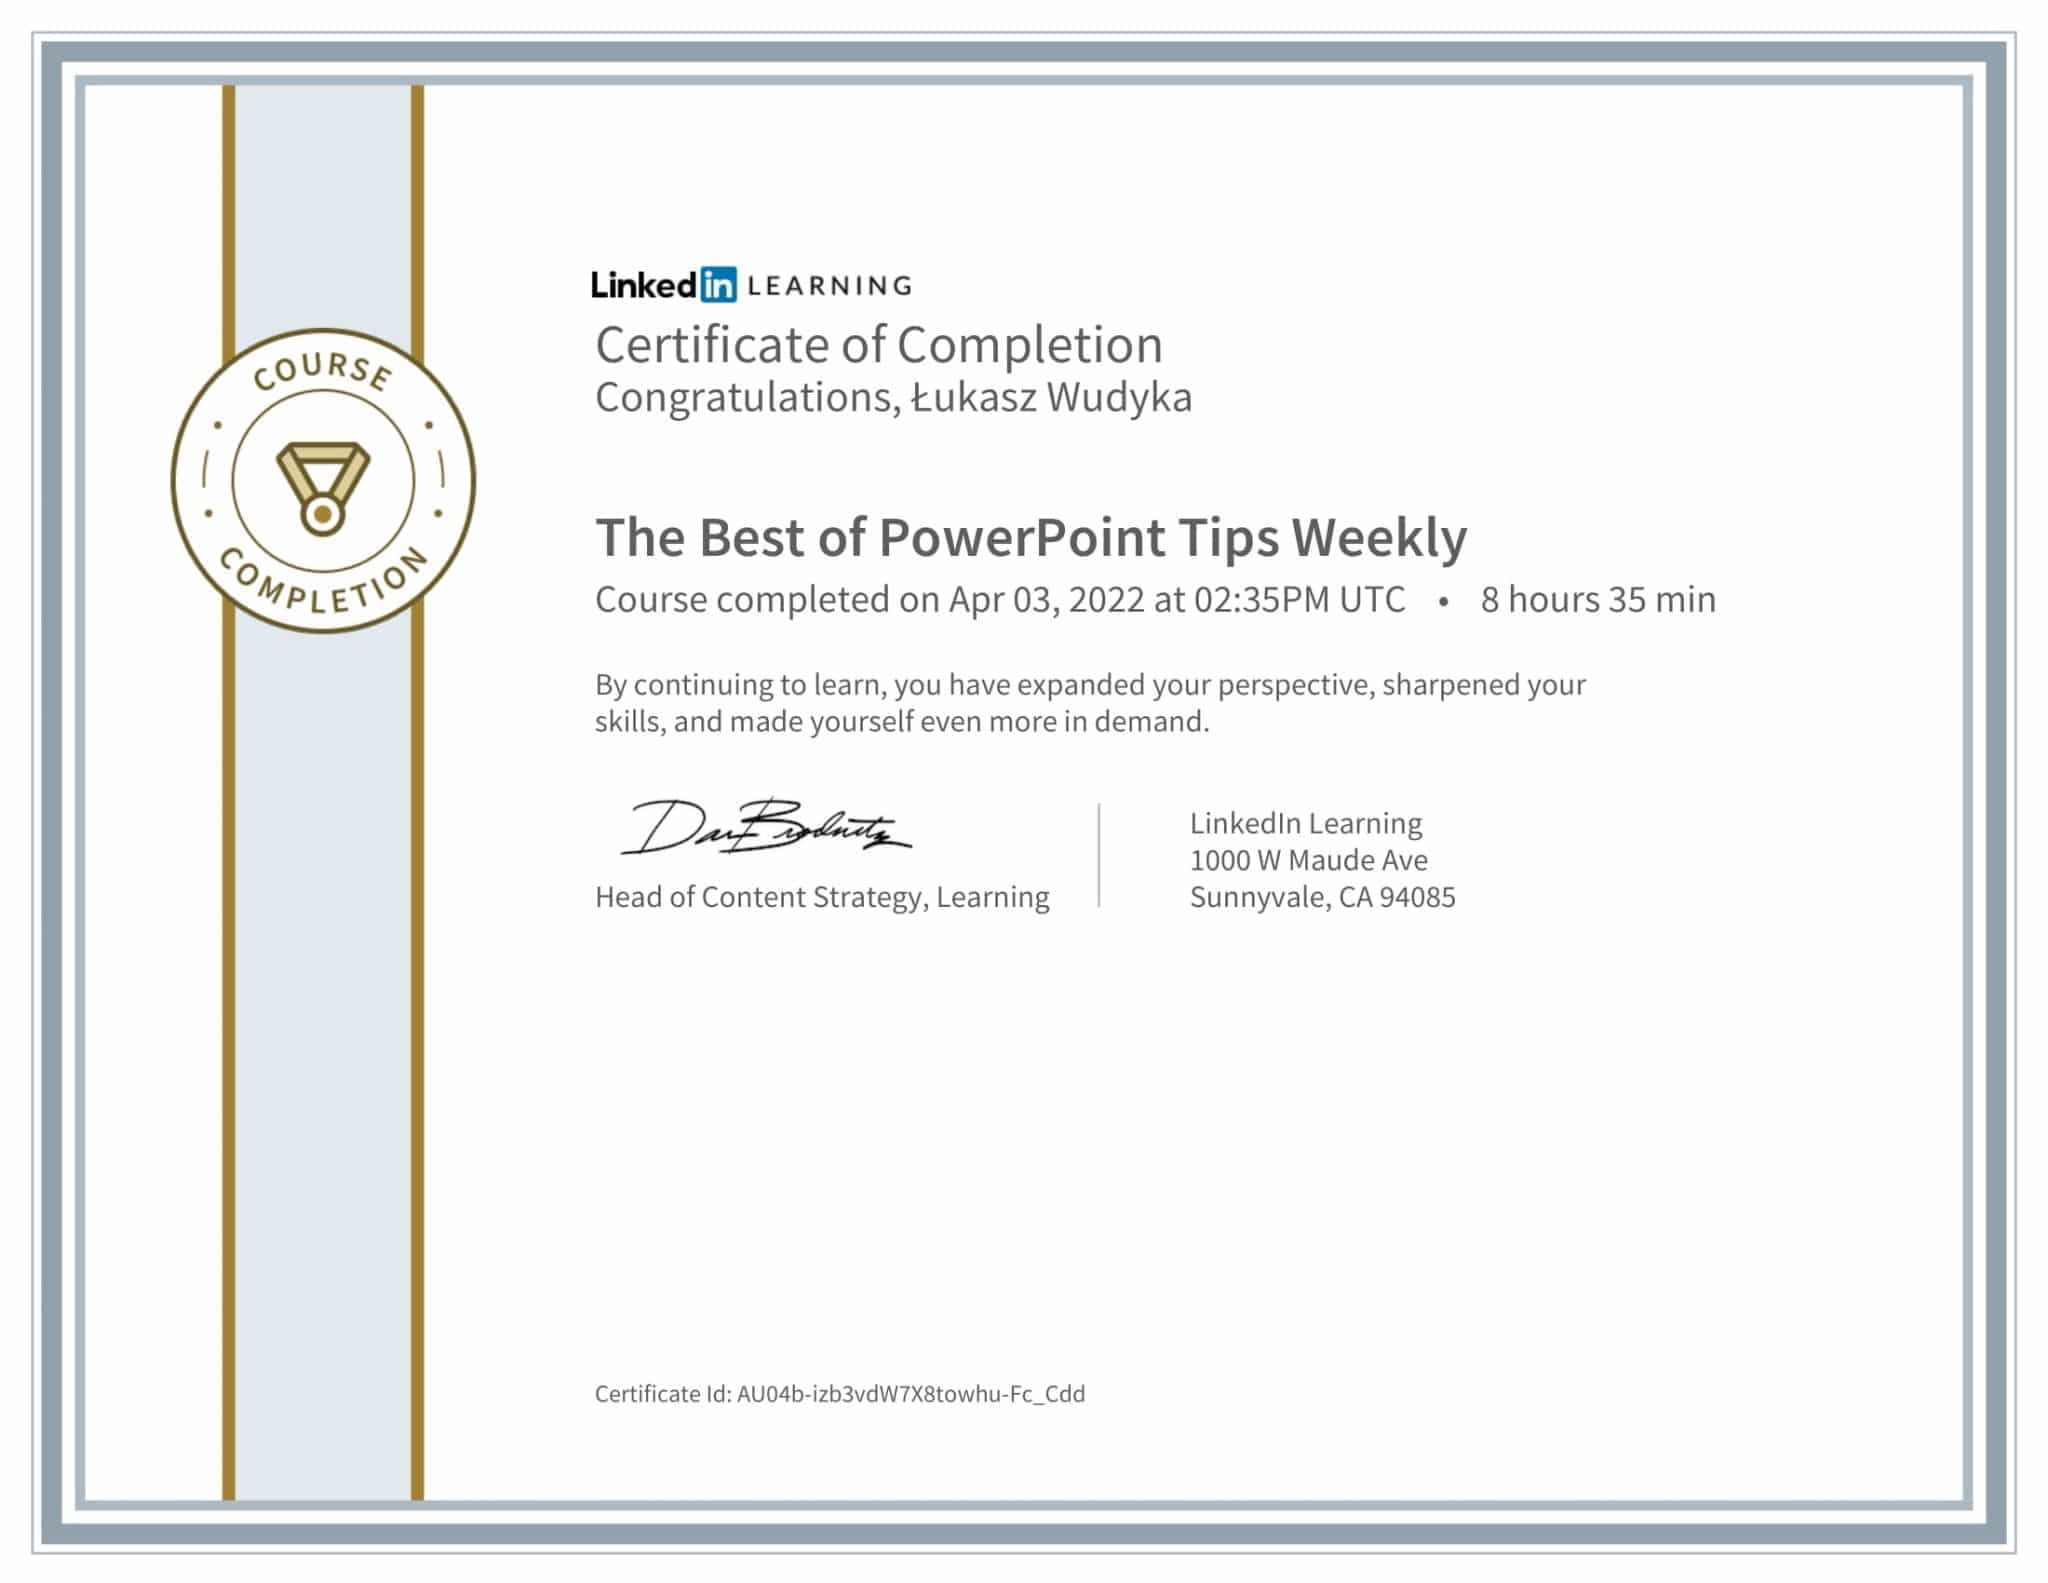 CertificateOfCompletion_The Best of PowerPoint Tips Weekly-1